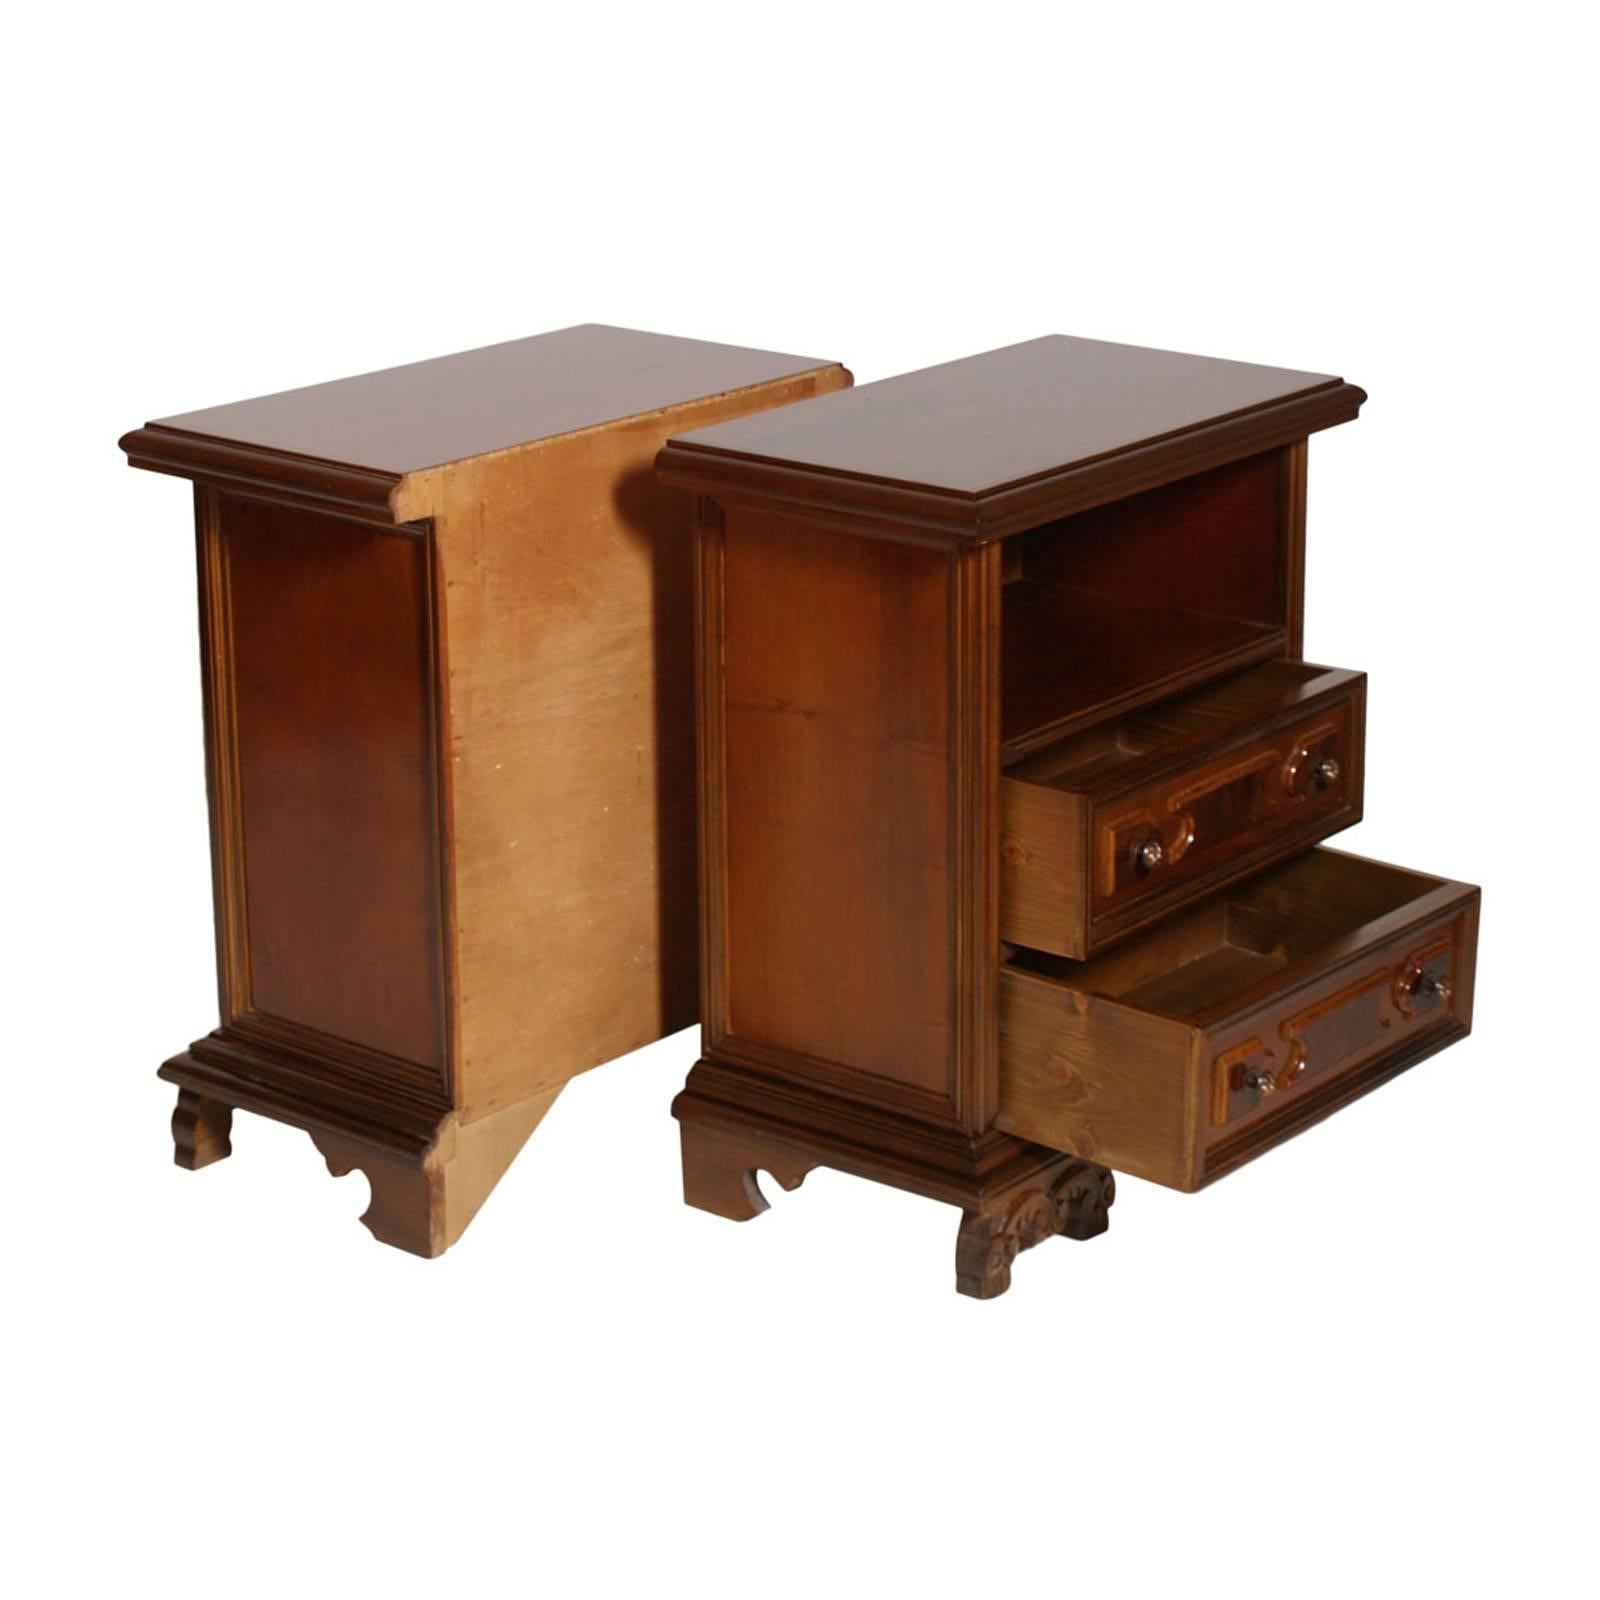 Tuscany Florence Early 20th century Renaissance nightstands in walnut ,polished to wax
Measures cm: H 70, W 60, D 35.